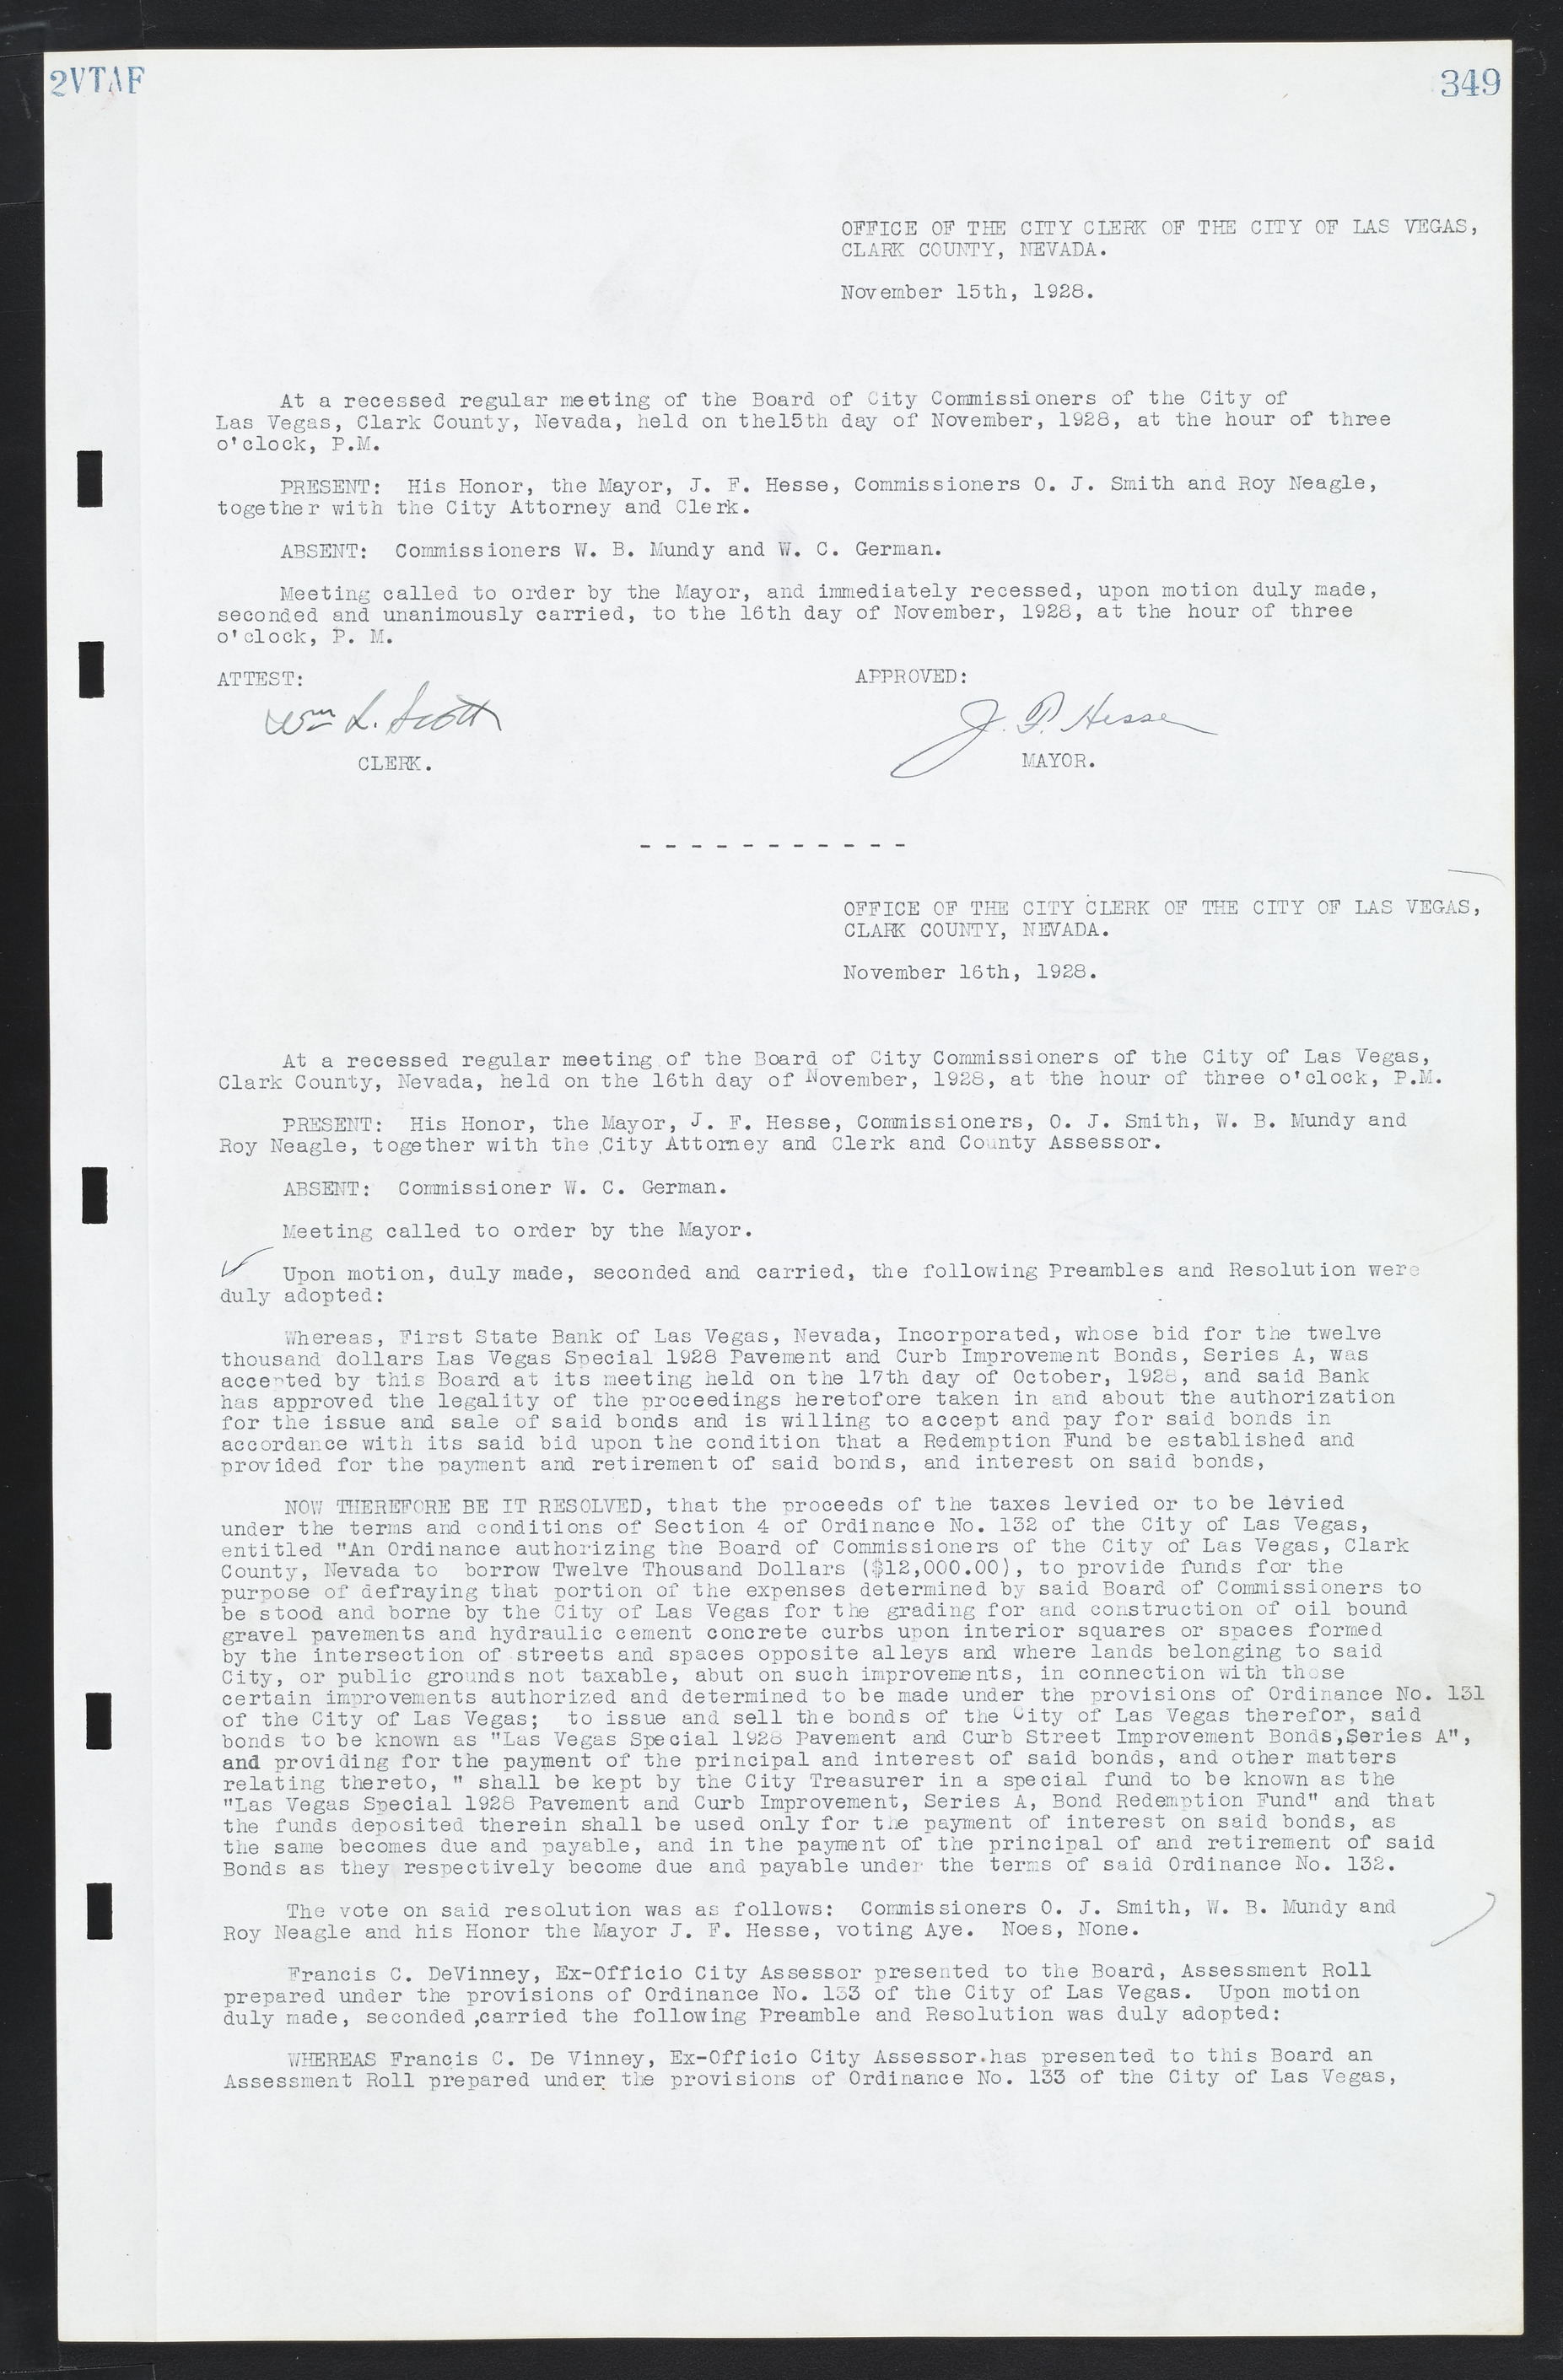 Las Vegas City Commission Minutes, March 1, 1922 to May 10, 1929, lvc000002-358